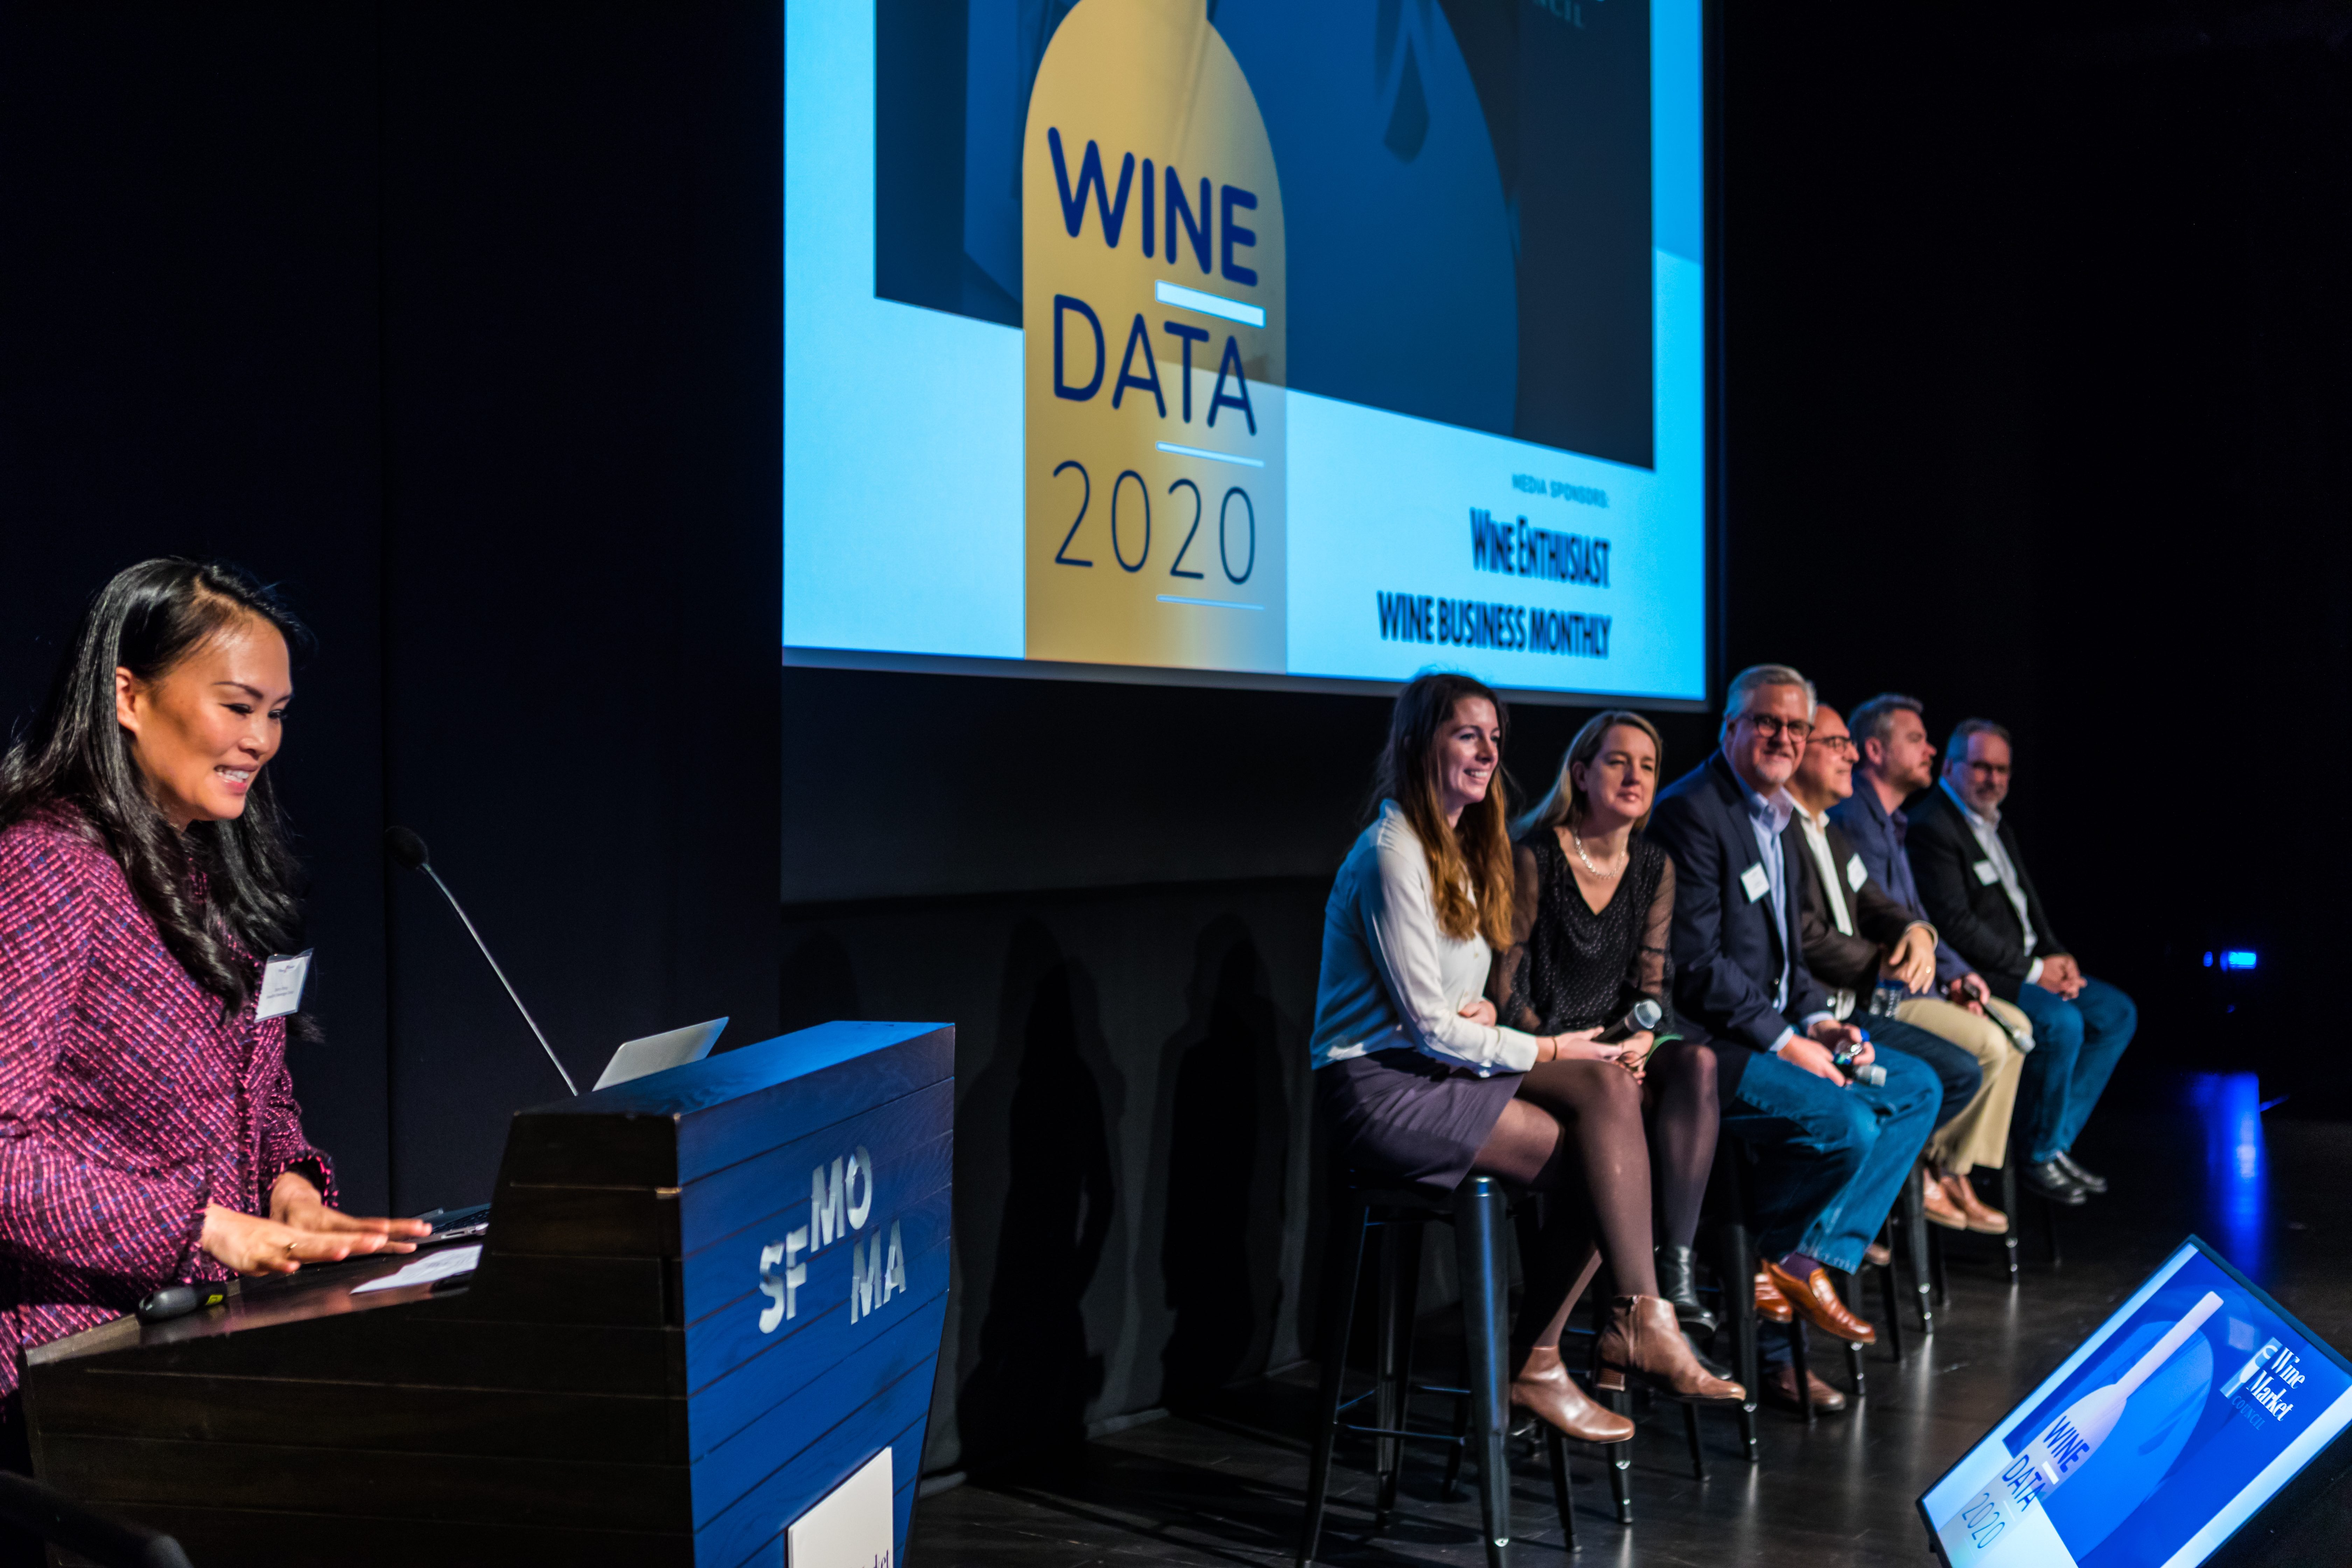 In 2020, Wine Market Council will collaborate for the first time with consumer data analytics company Nielsen Global Connect to collaborate on a far-reaching Wine & Wellness study.